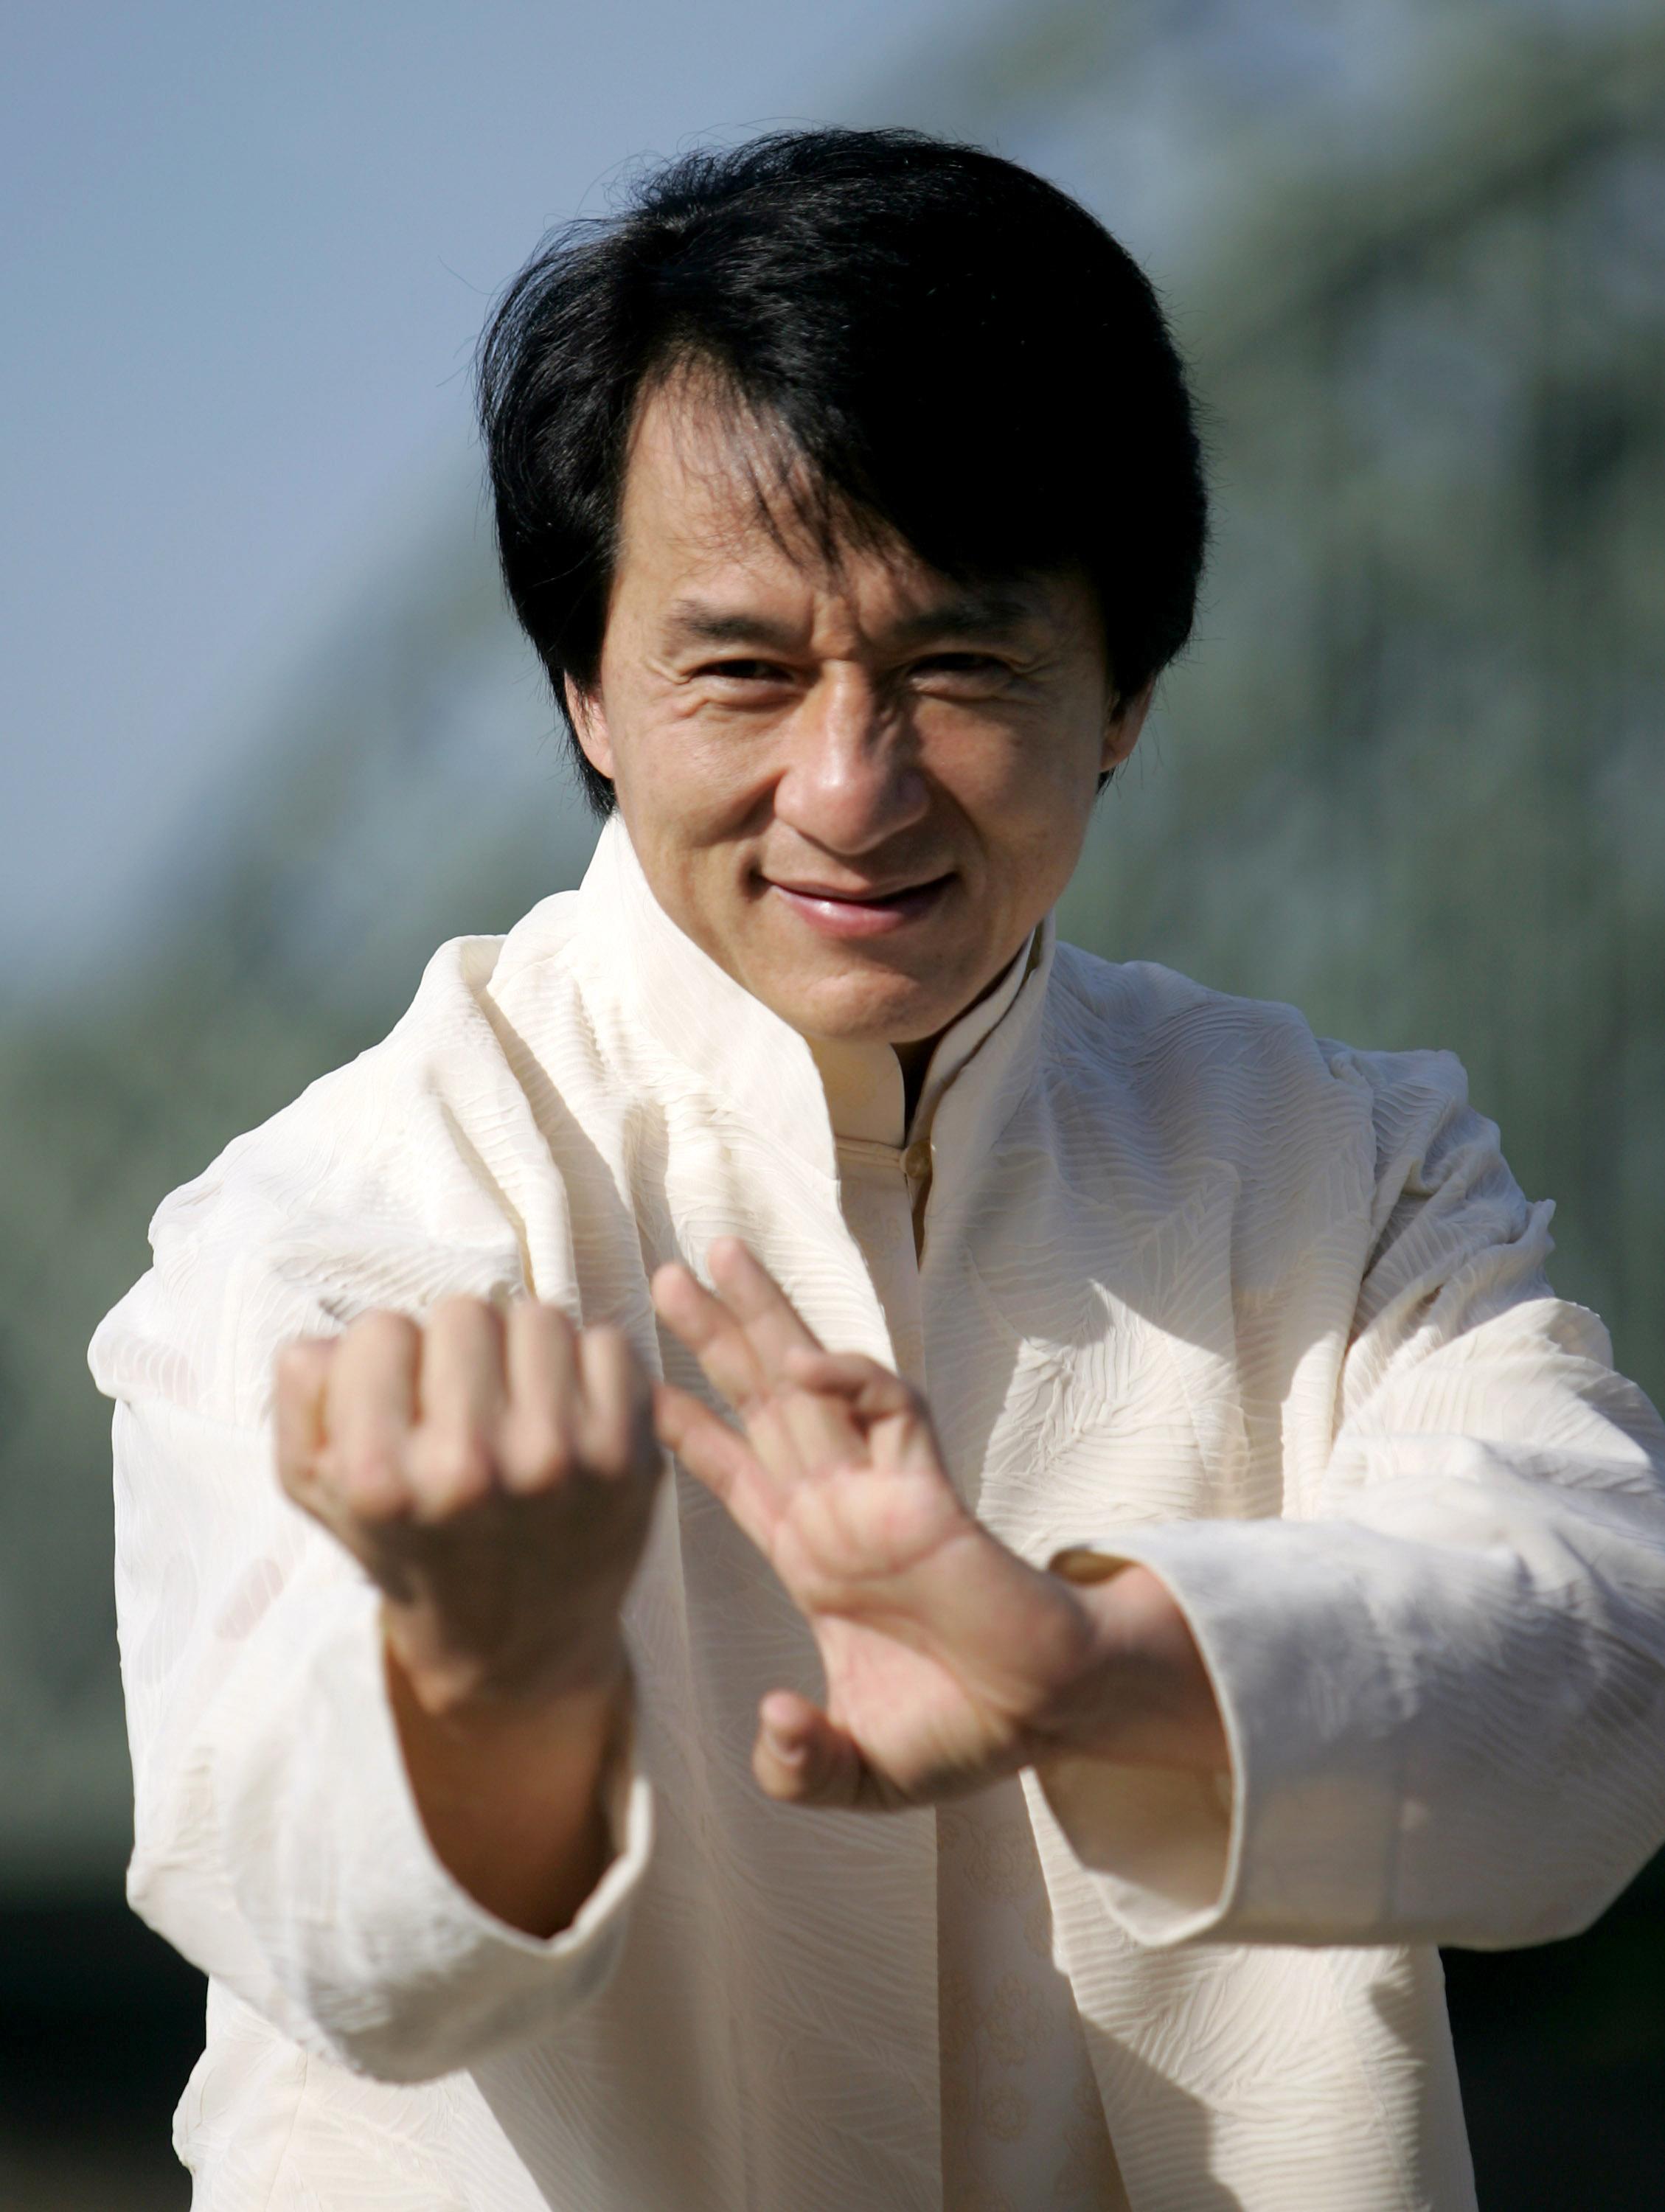 Jackie Chan, pozitie kung fu, imbracat in alb